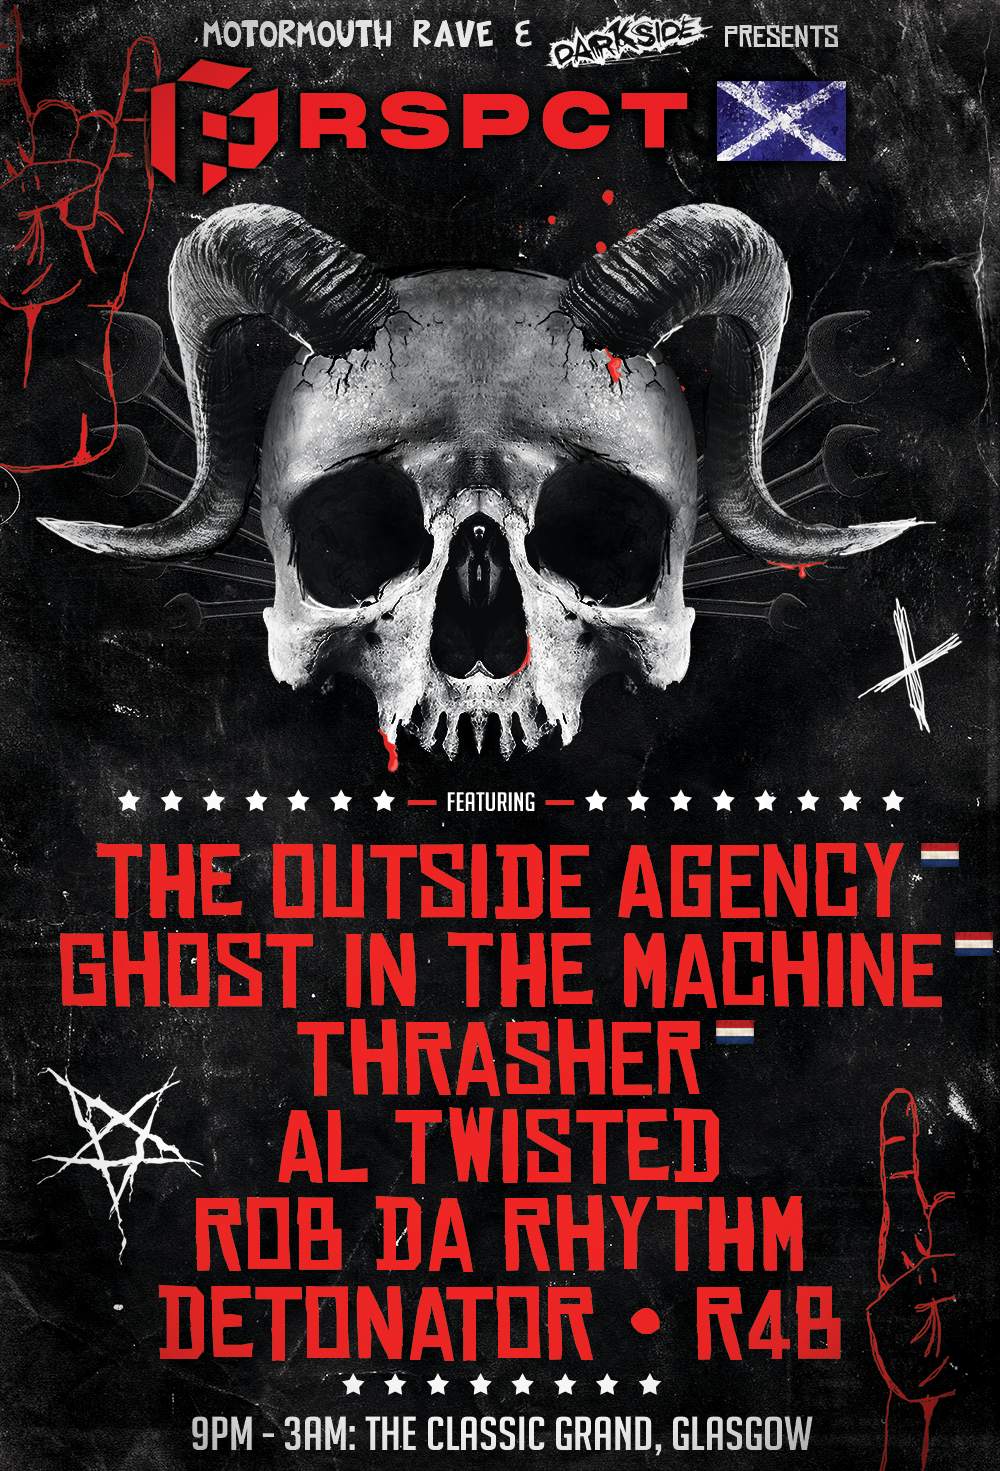 Motormouth presents PRSPCT - Scotland feat Ghost In The Machine, The Outside Agency, Thrasher - Página frontal